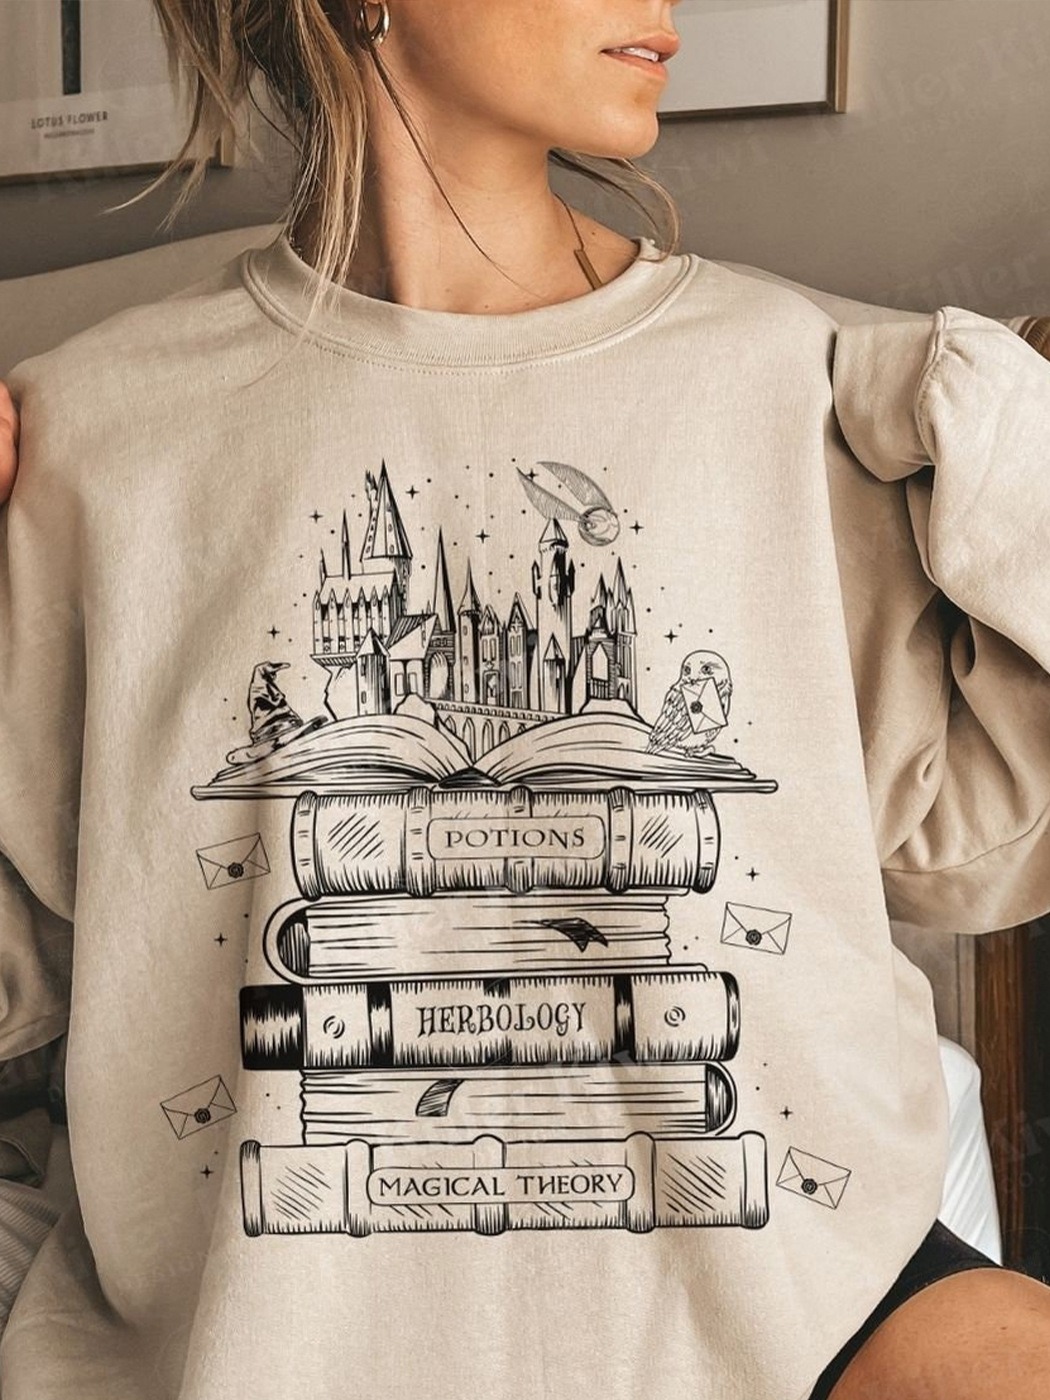 Potions Herbology Magical Theory Sweatshirt